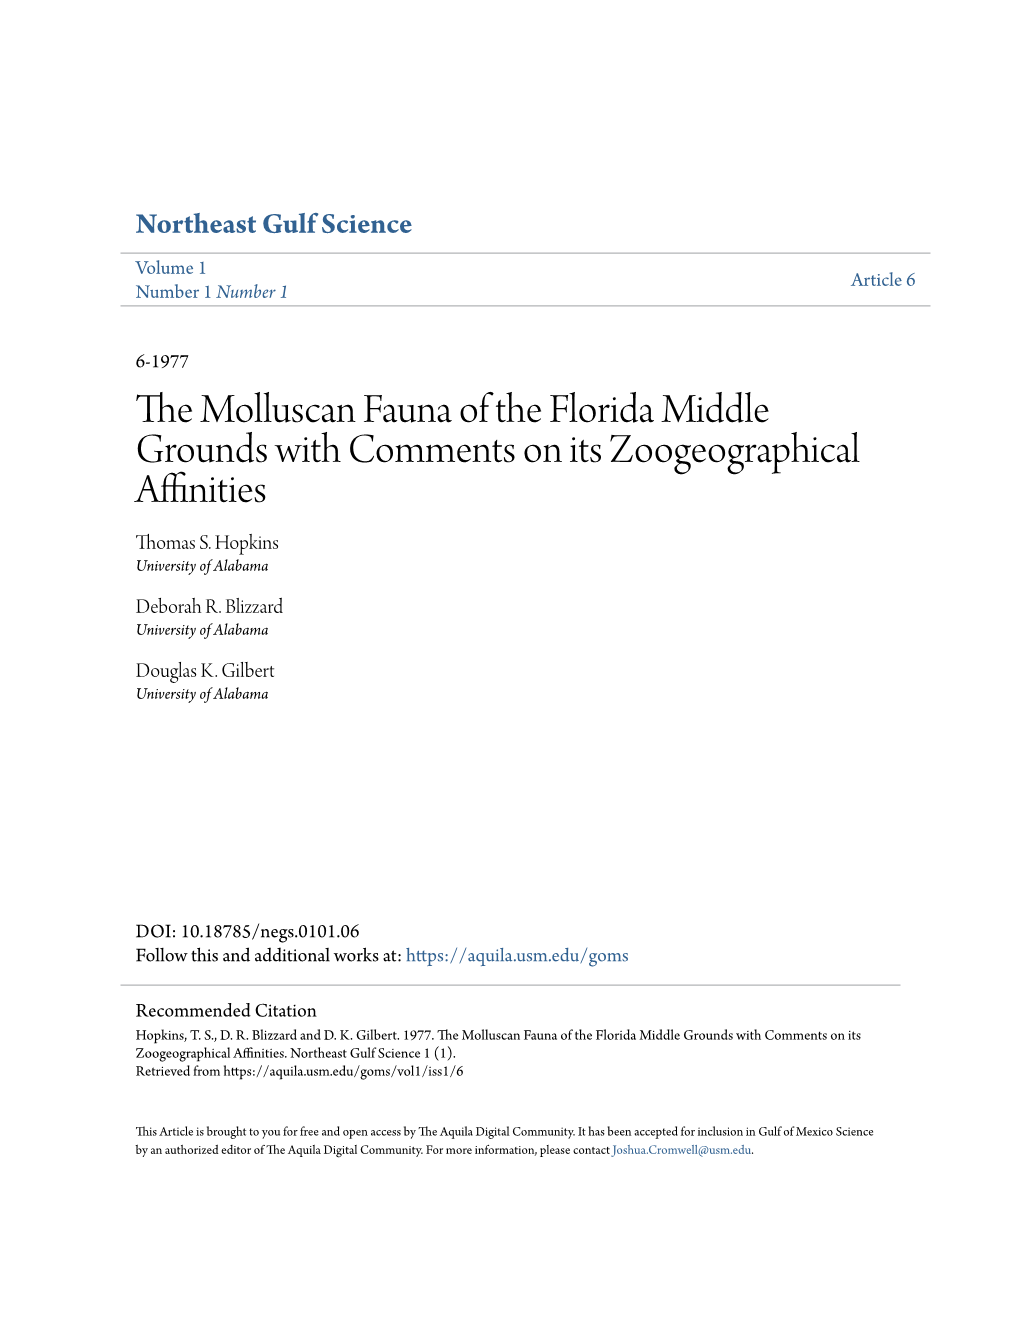 The Molluscan Fauna of the Florida Middle Grounds with Comments on It's Zoogeographical Affinities!